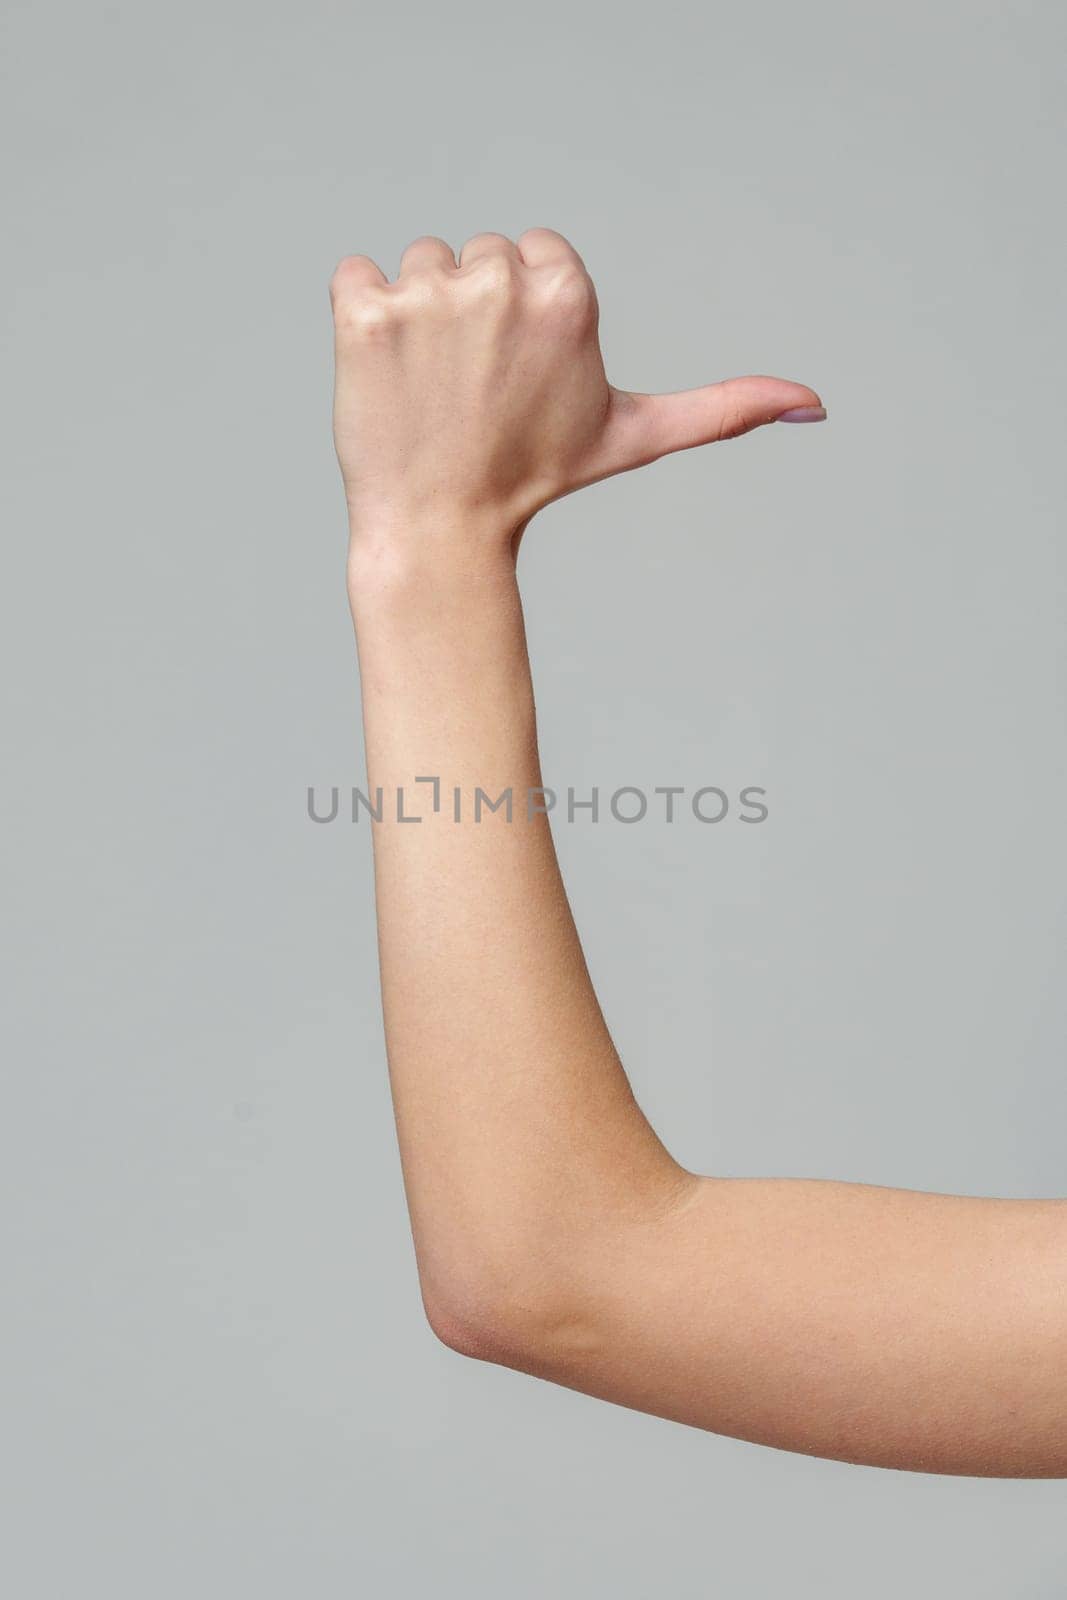 Female hand gesturing thumb up sign on gray background close up